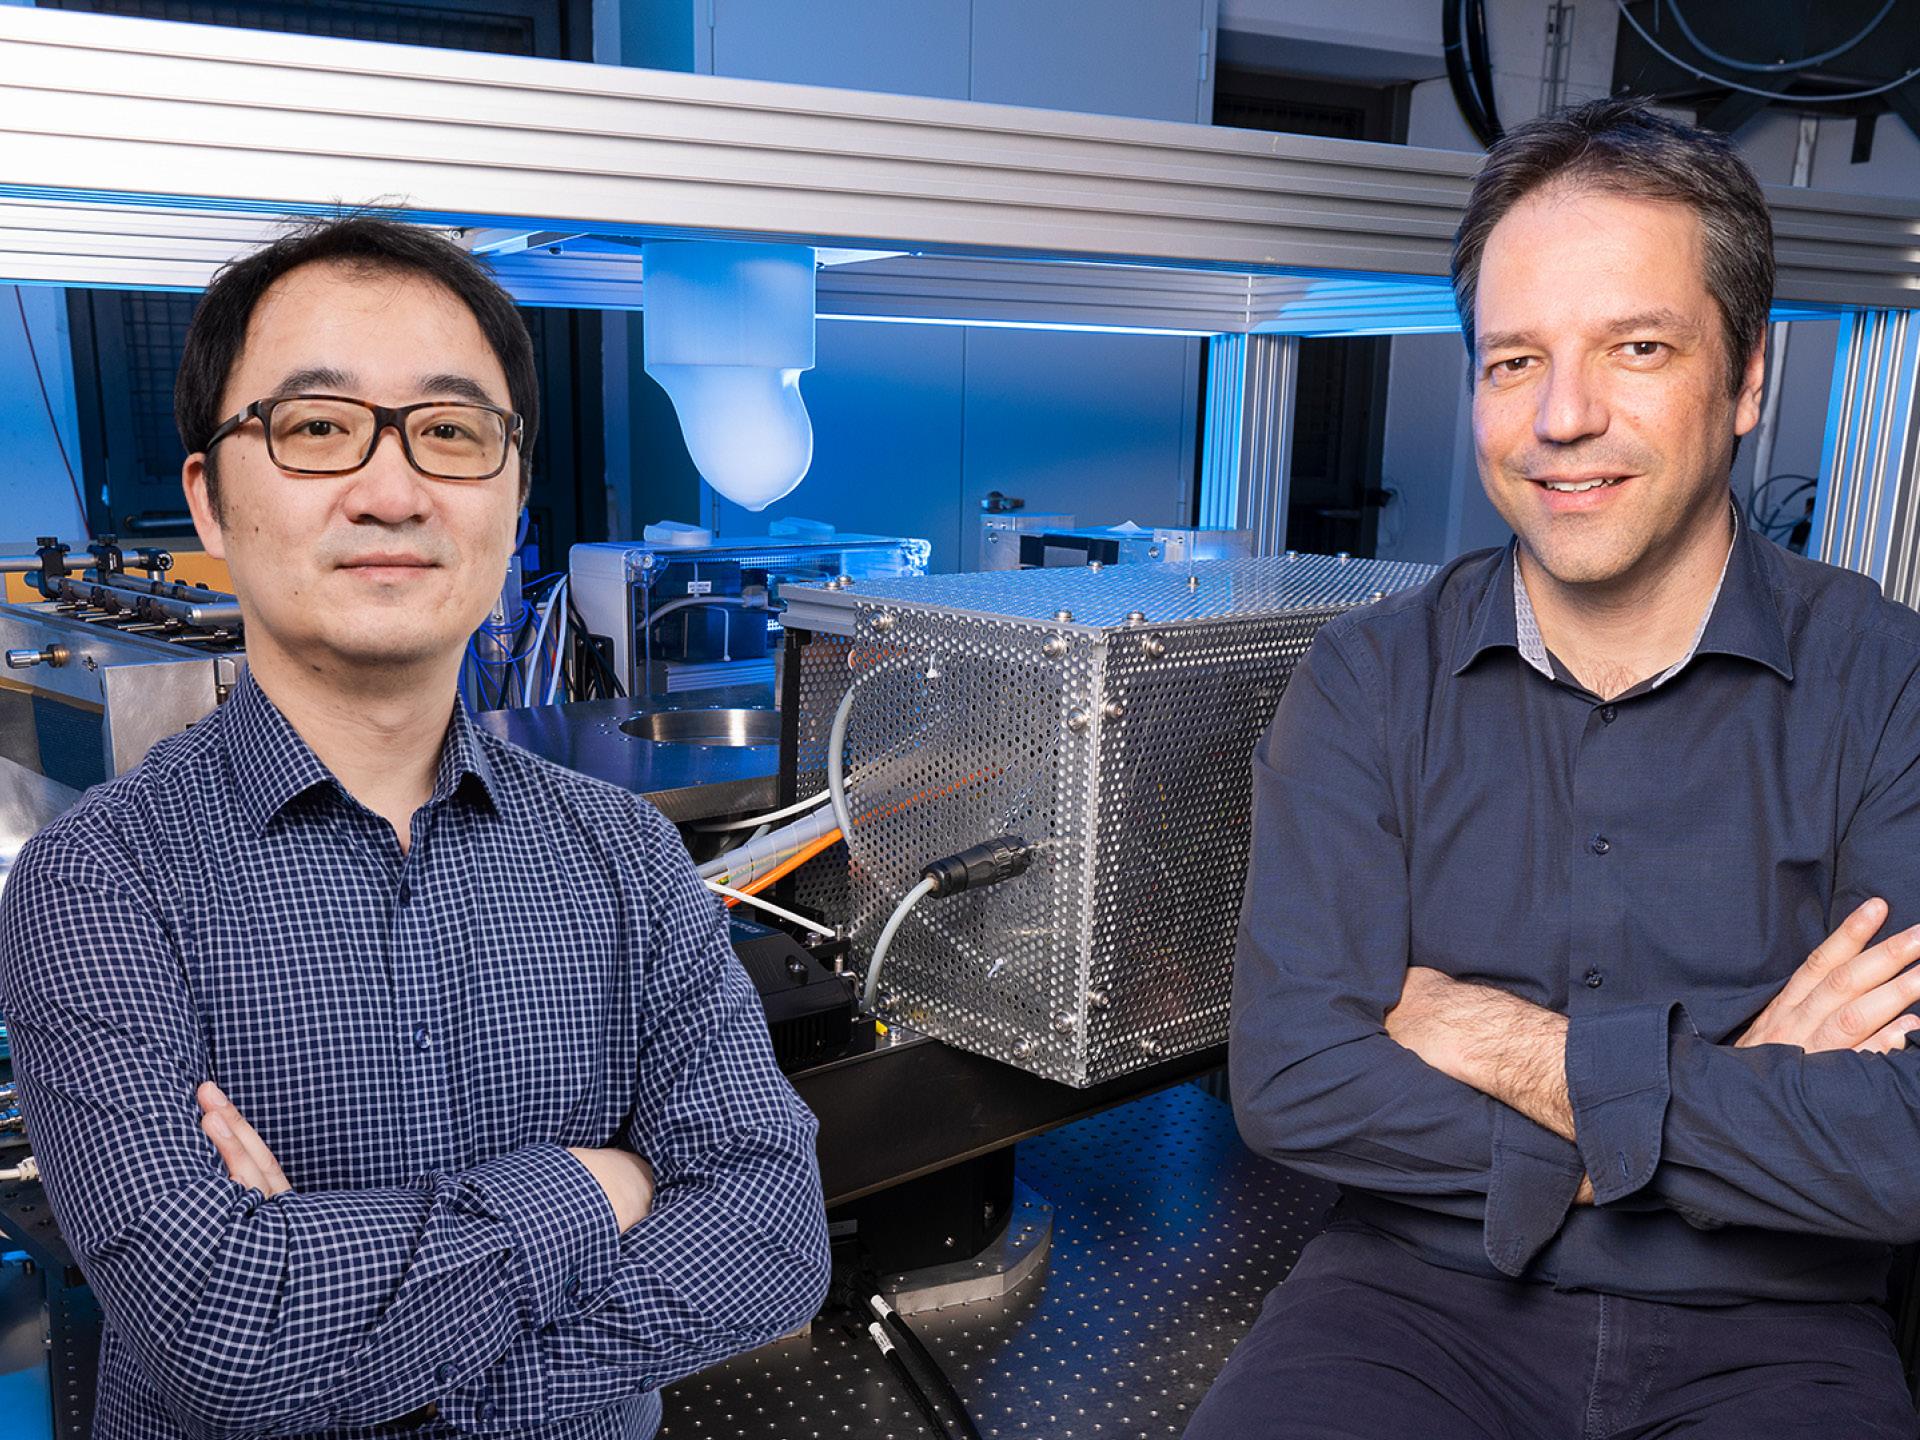 Marco Stampanoni and Zhentian Wang with blue shirts in their laboratory, smiling at camera with crossed arms